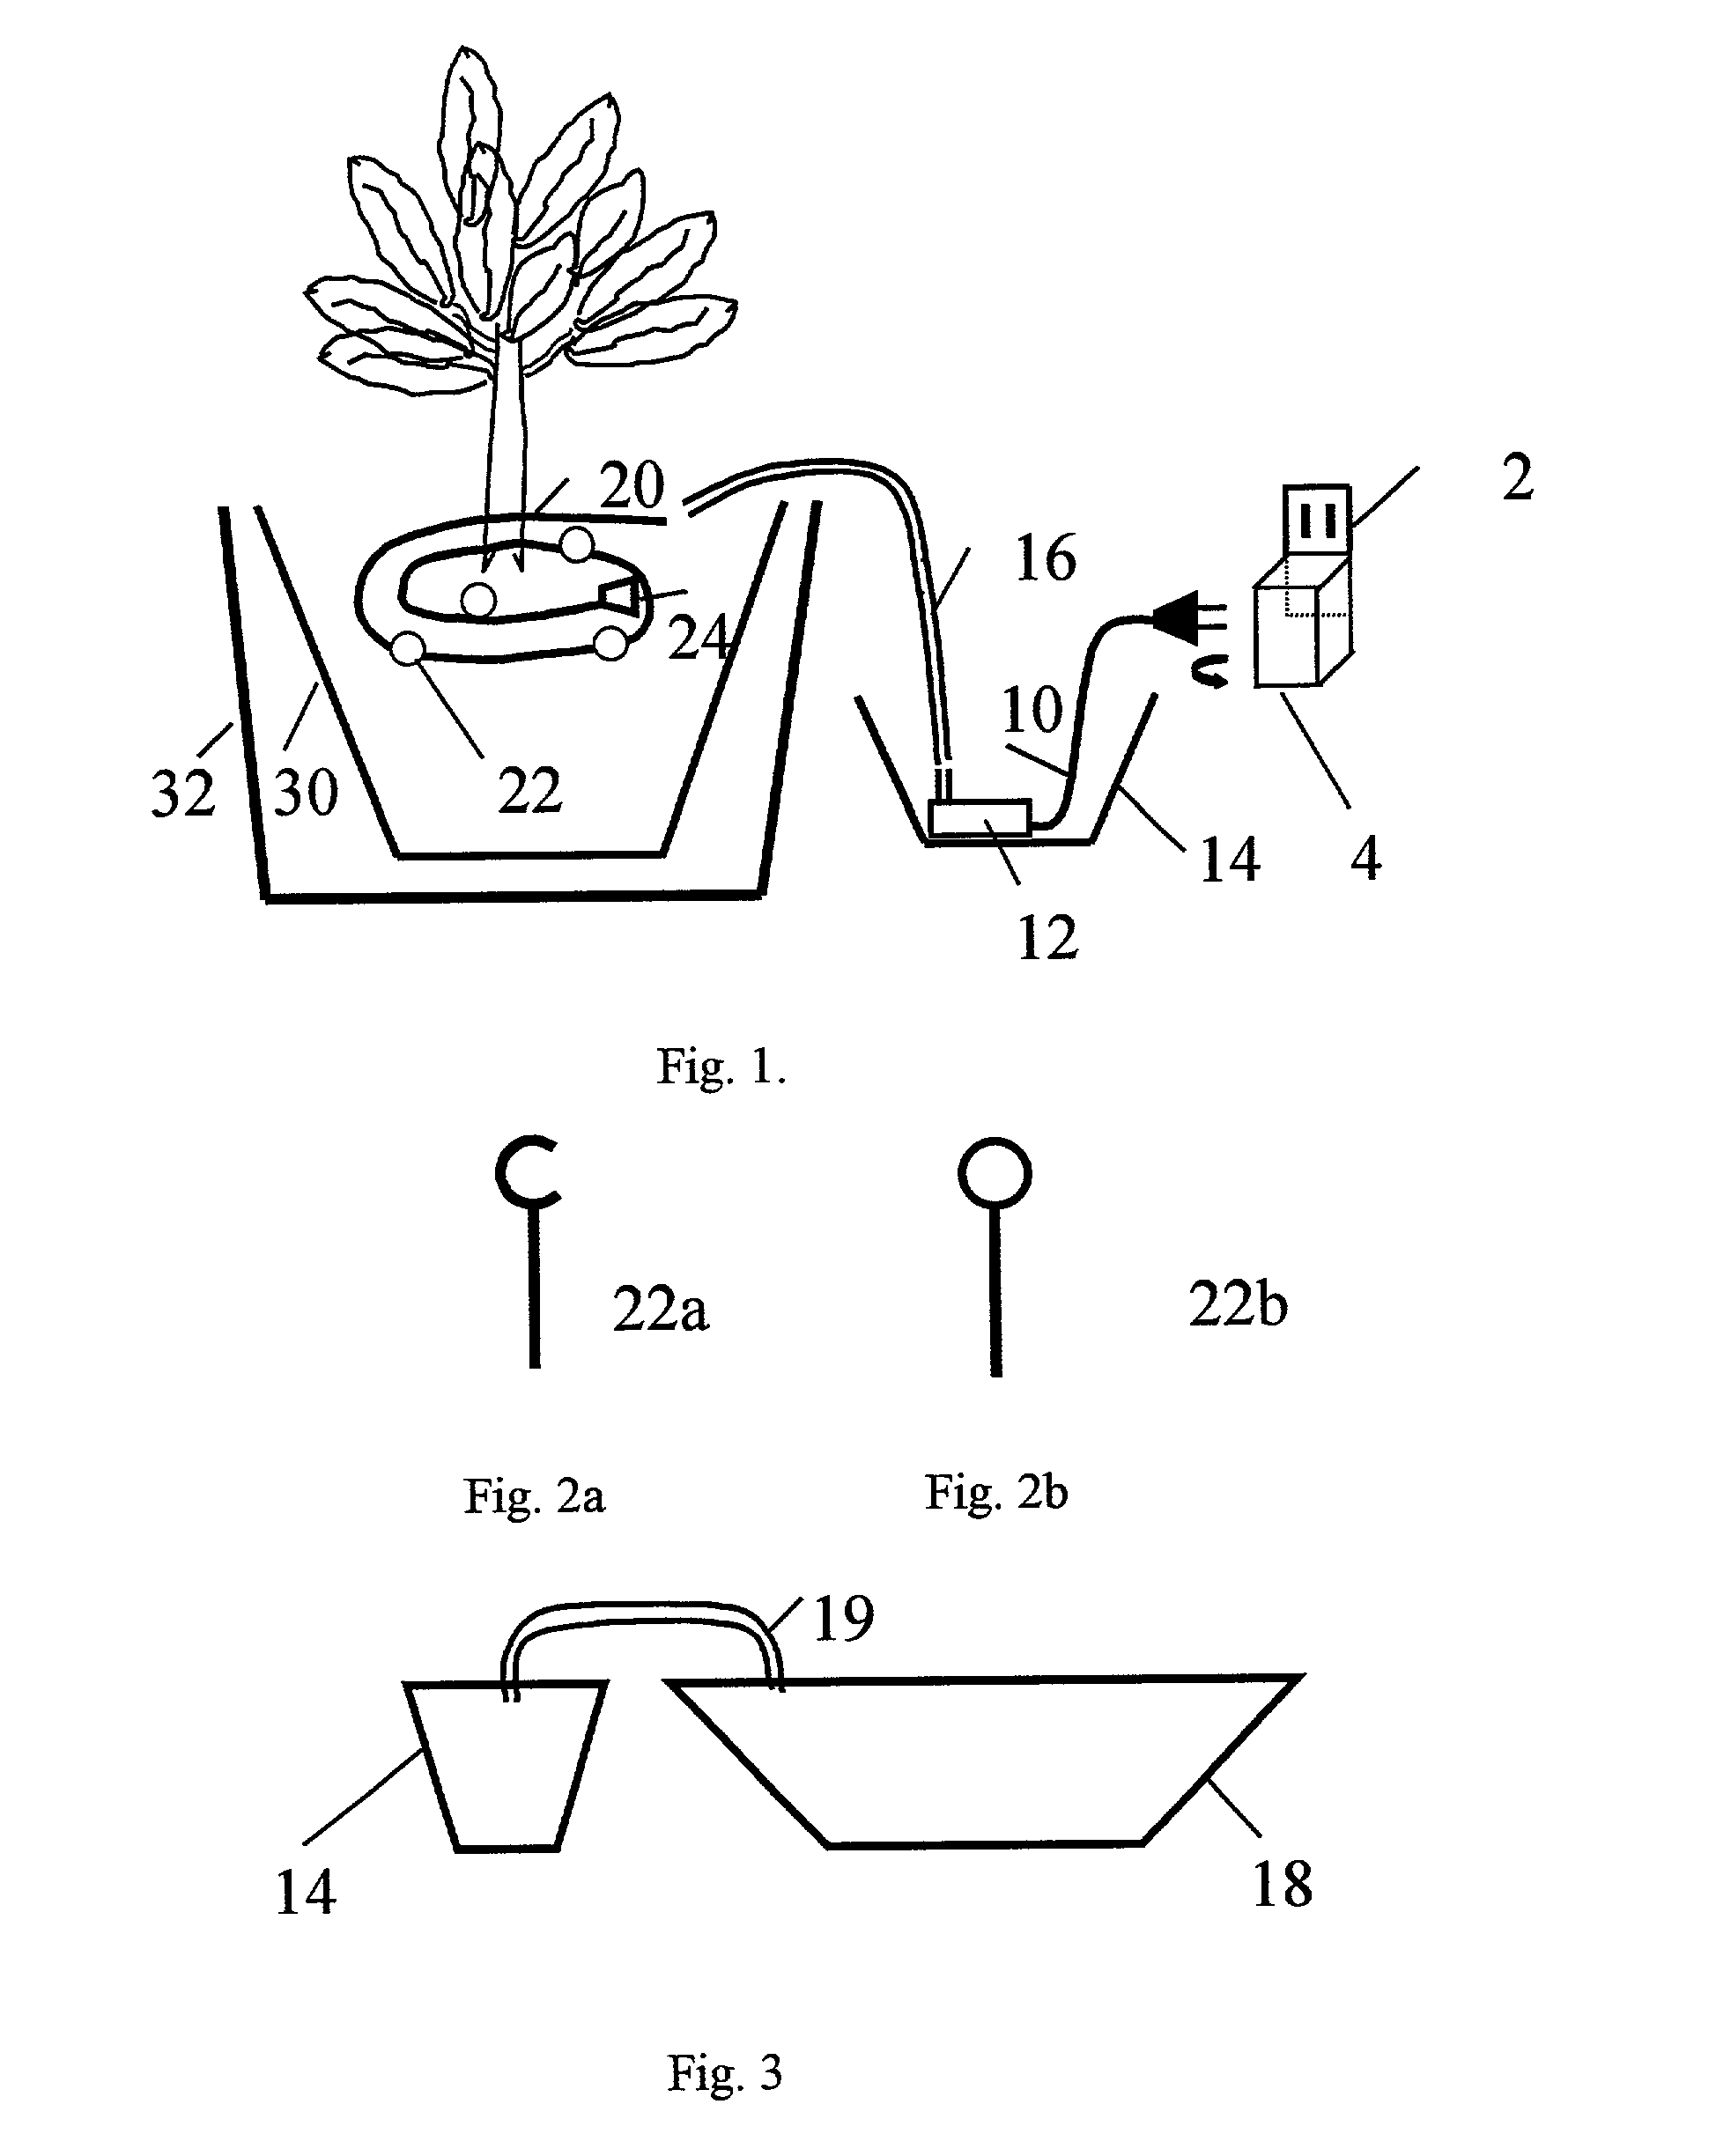 Automatic houseplant watering apparatus for homes and offices